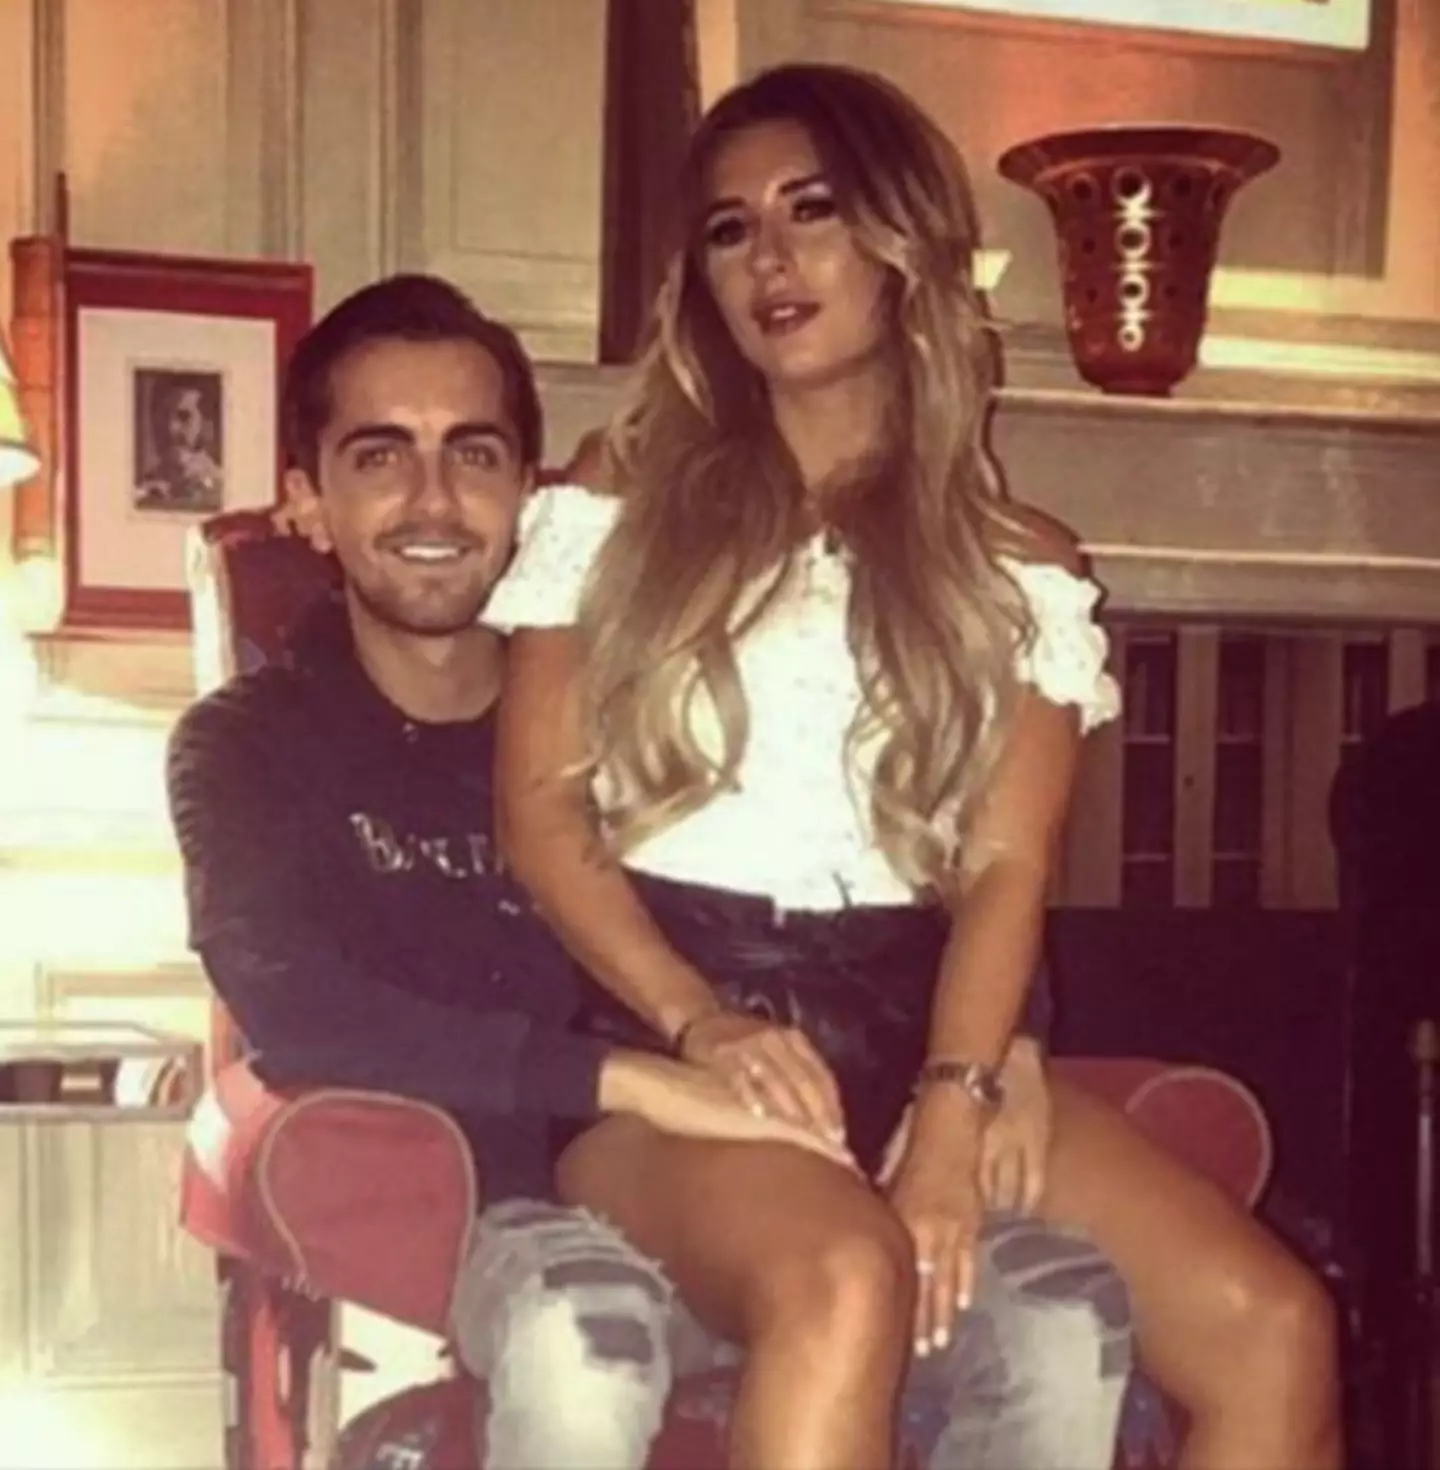 The pair previously dated before Dani went on Love Island (